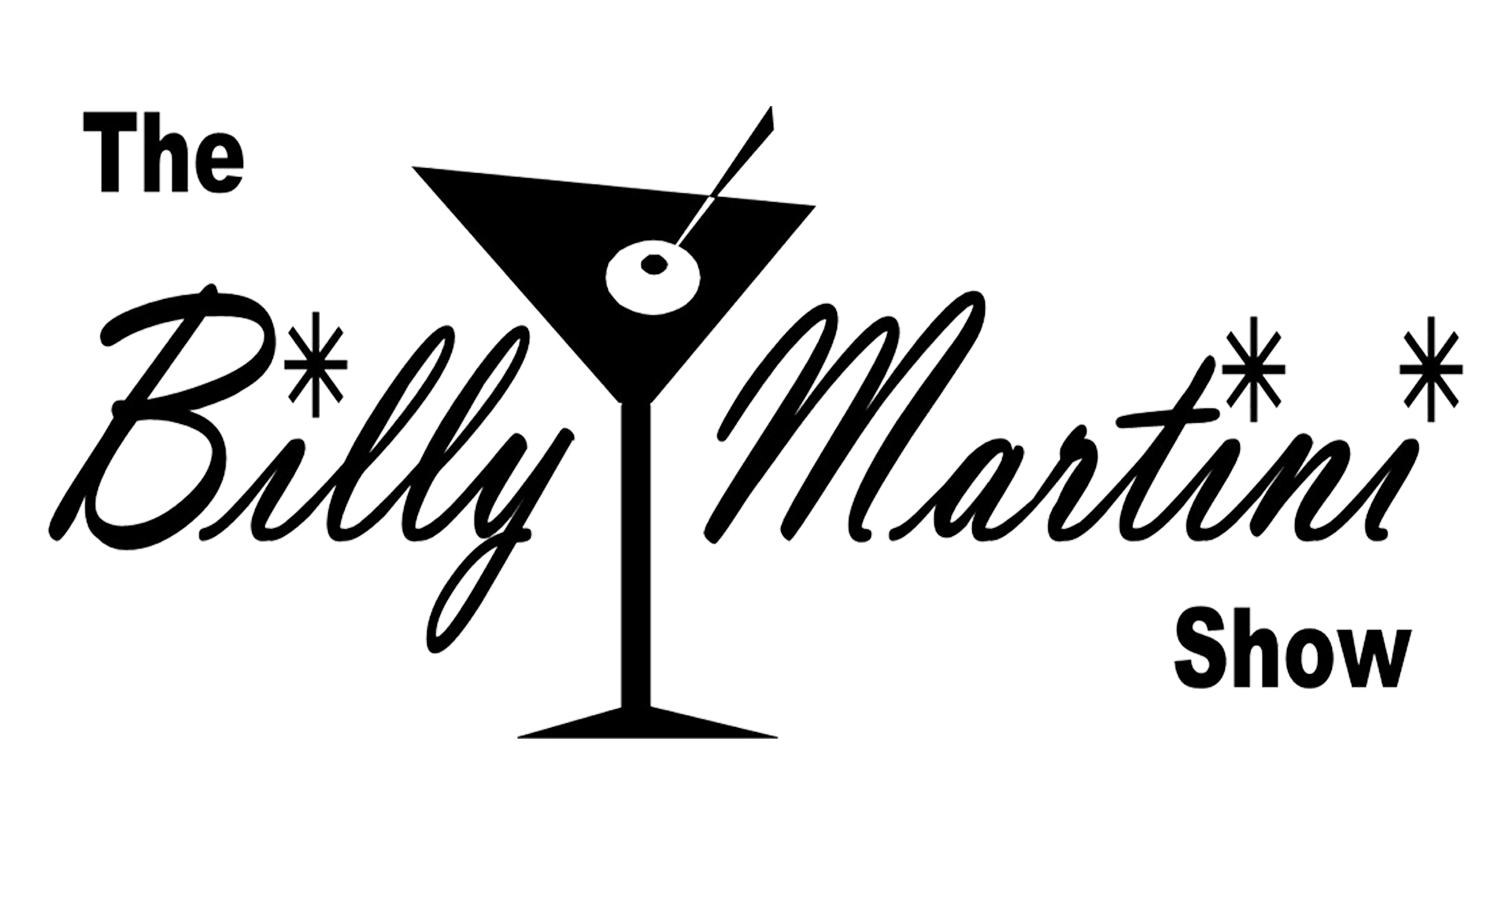 The Billy Martini Show